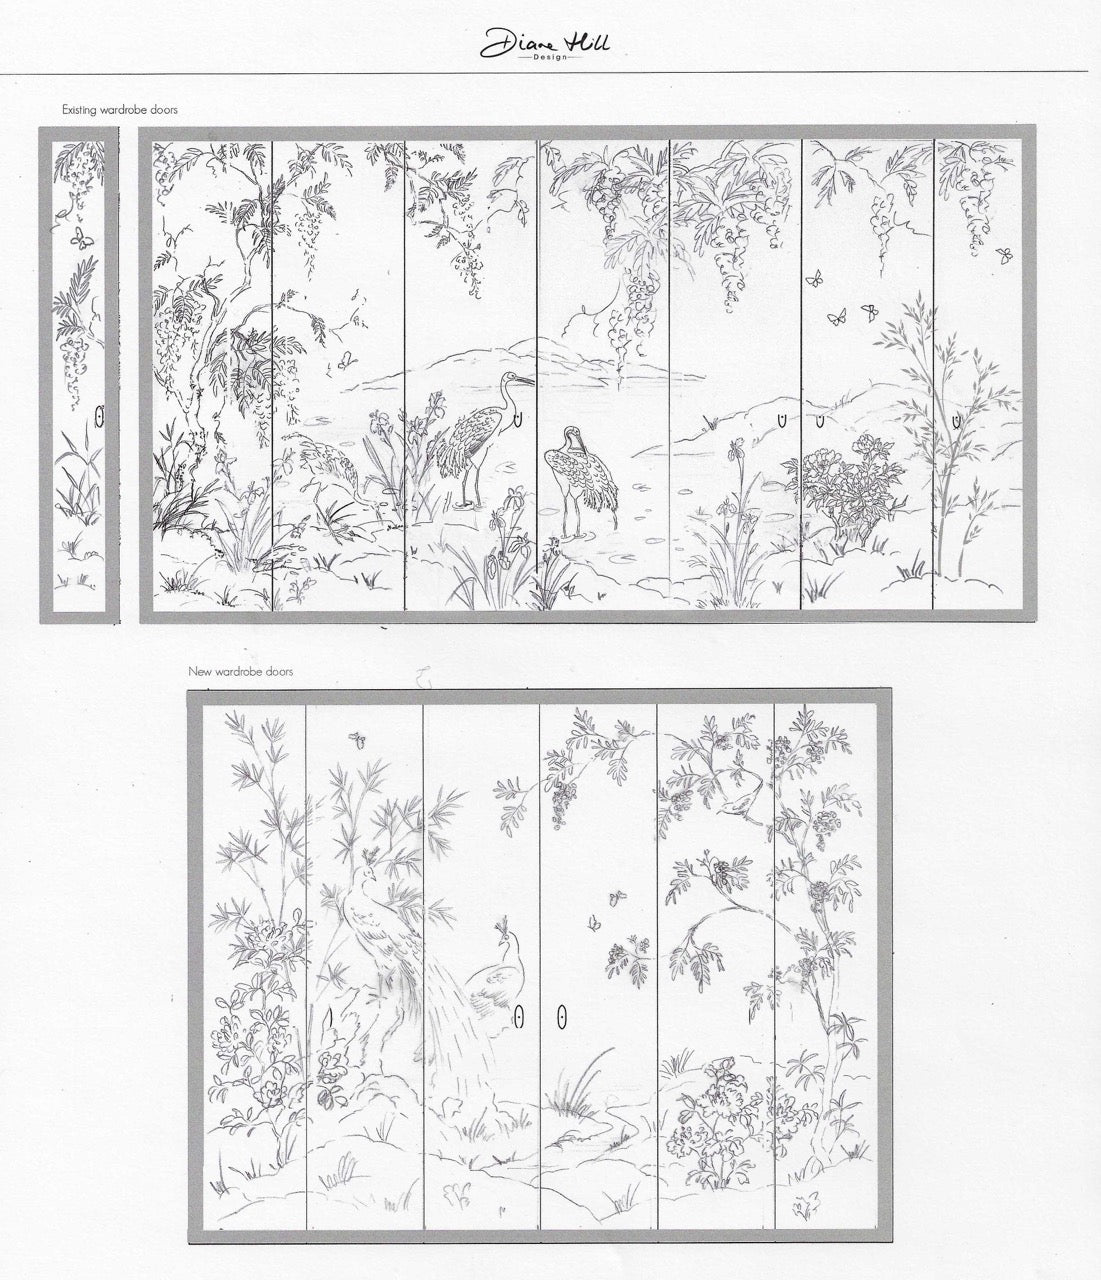 Initial sketch of the mural designs onto wardrobe doors by Diane Hill